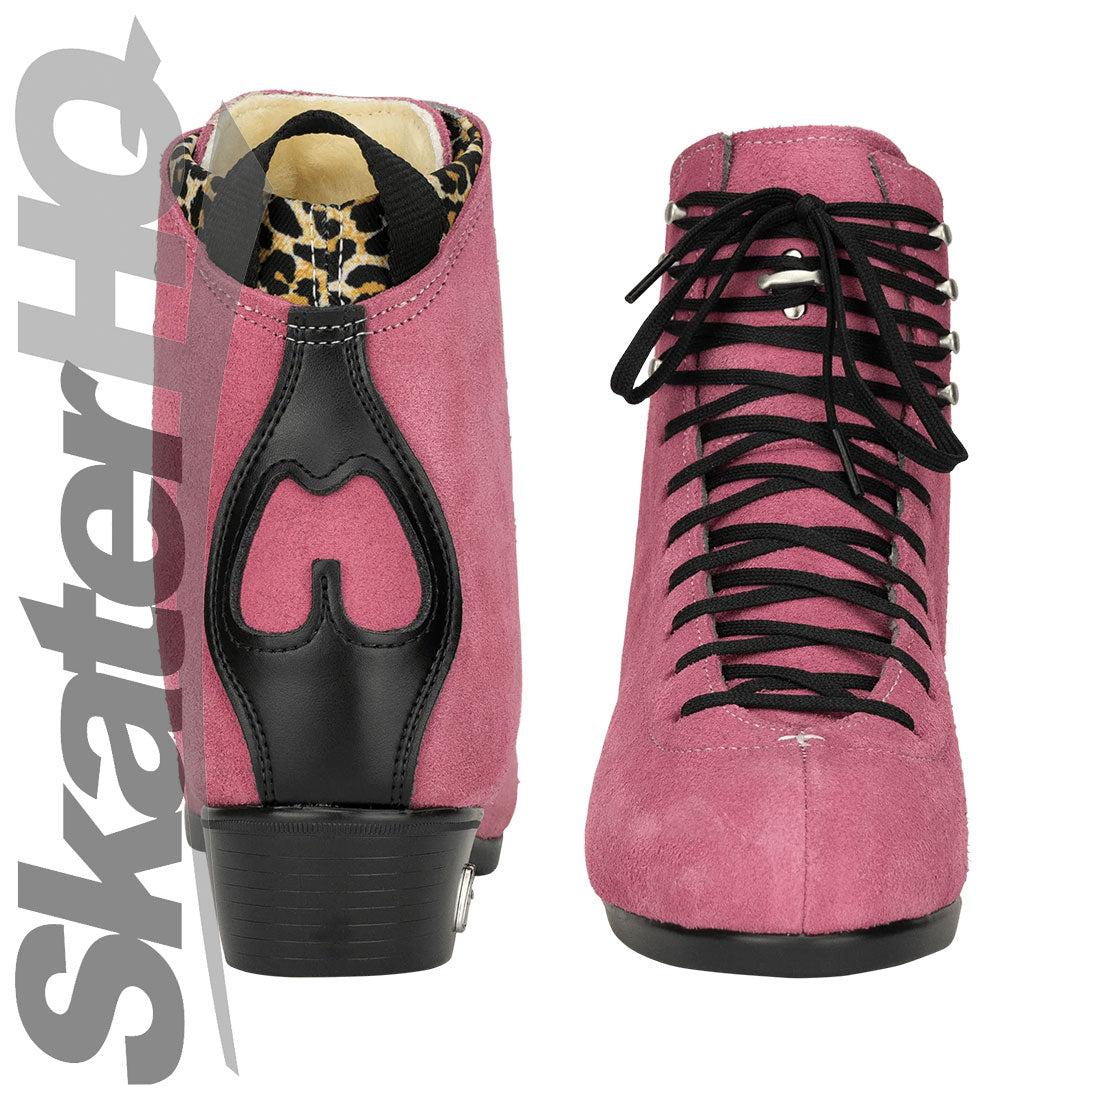 Moxi Jack 2 Boot - Special - Strawberry Roller Skate Boots